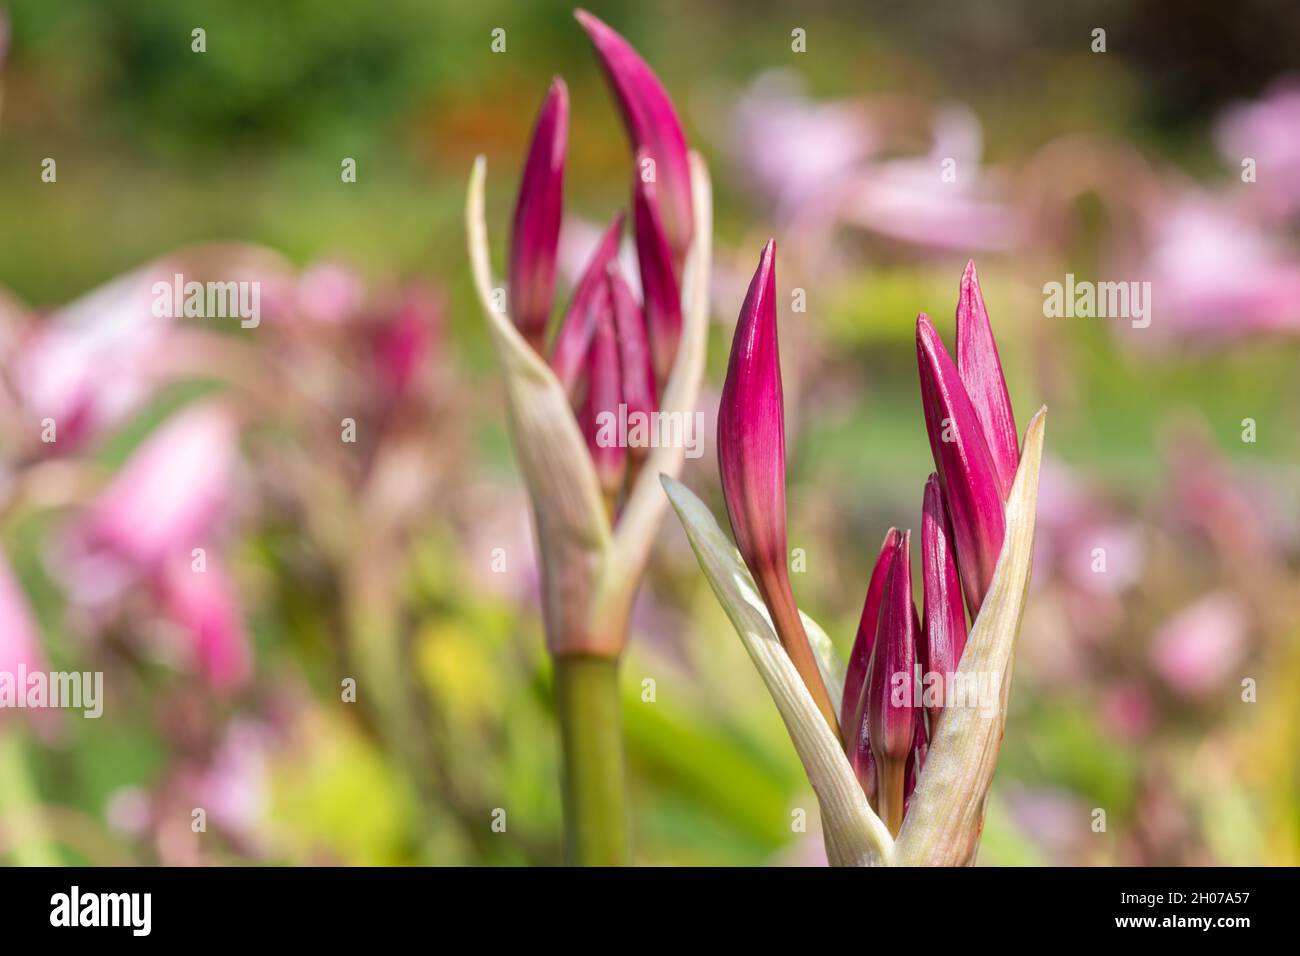 Close up of buds on a crinum moorei flower Stock Photo